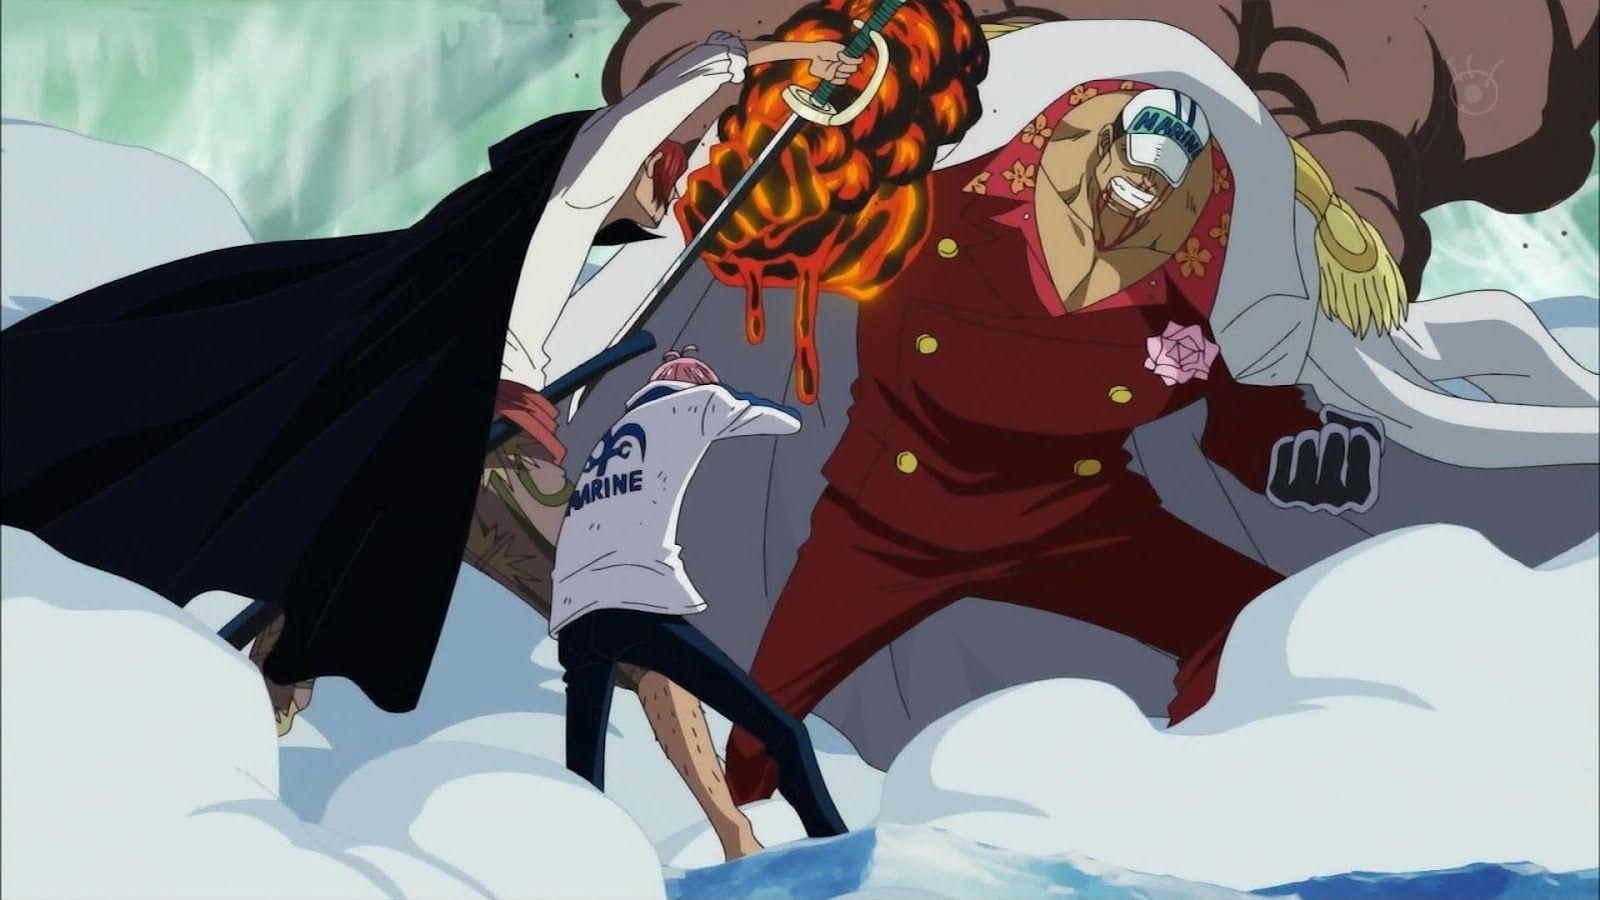 Akainu in Anime One Piece. More Games Review